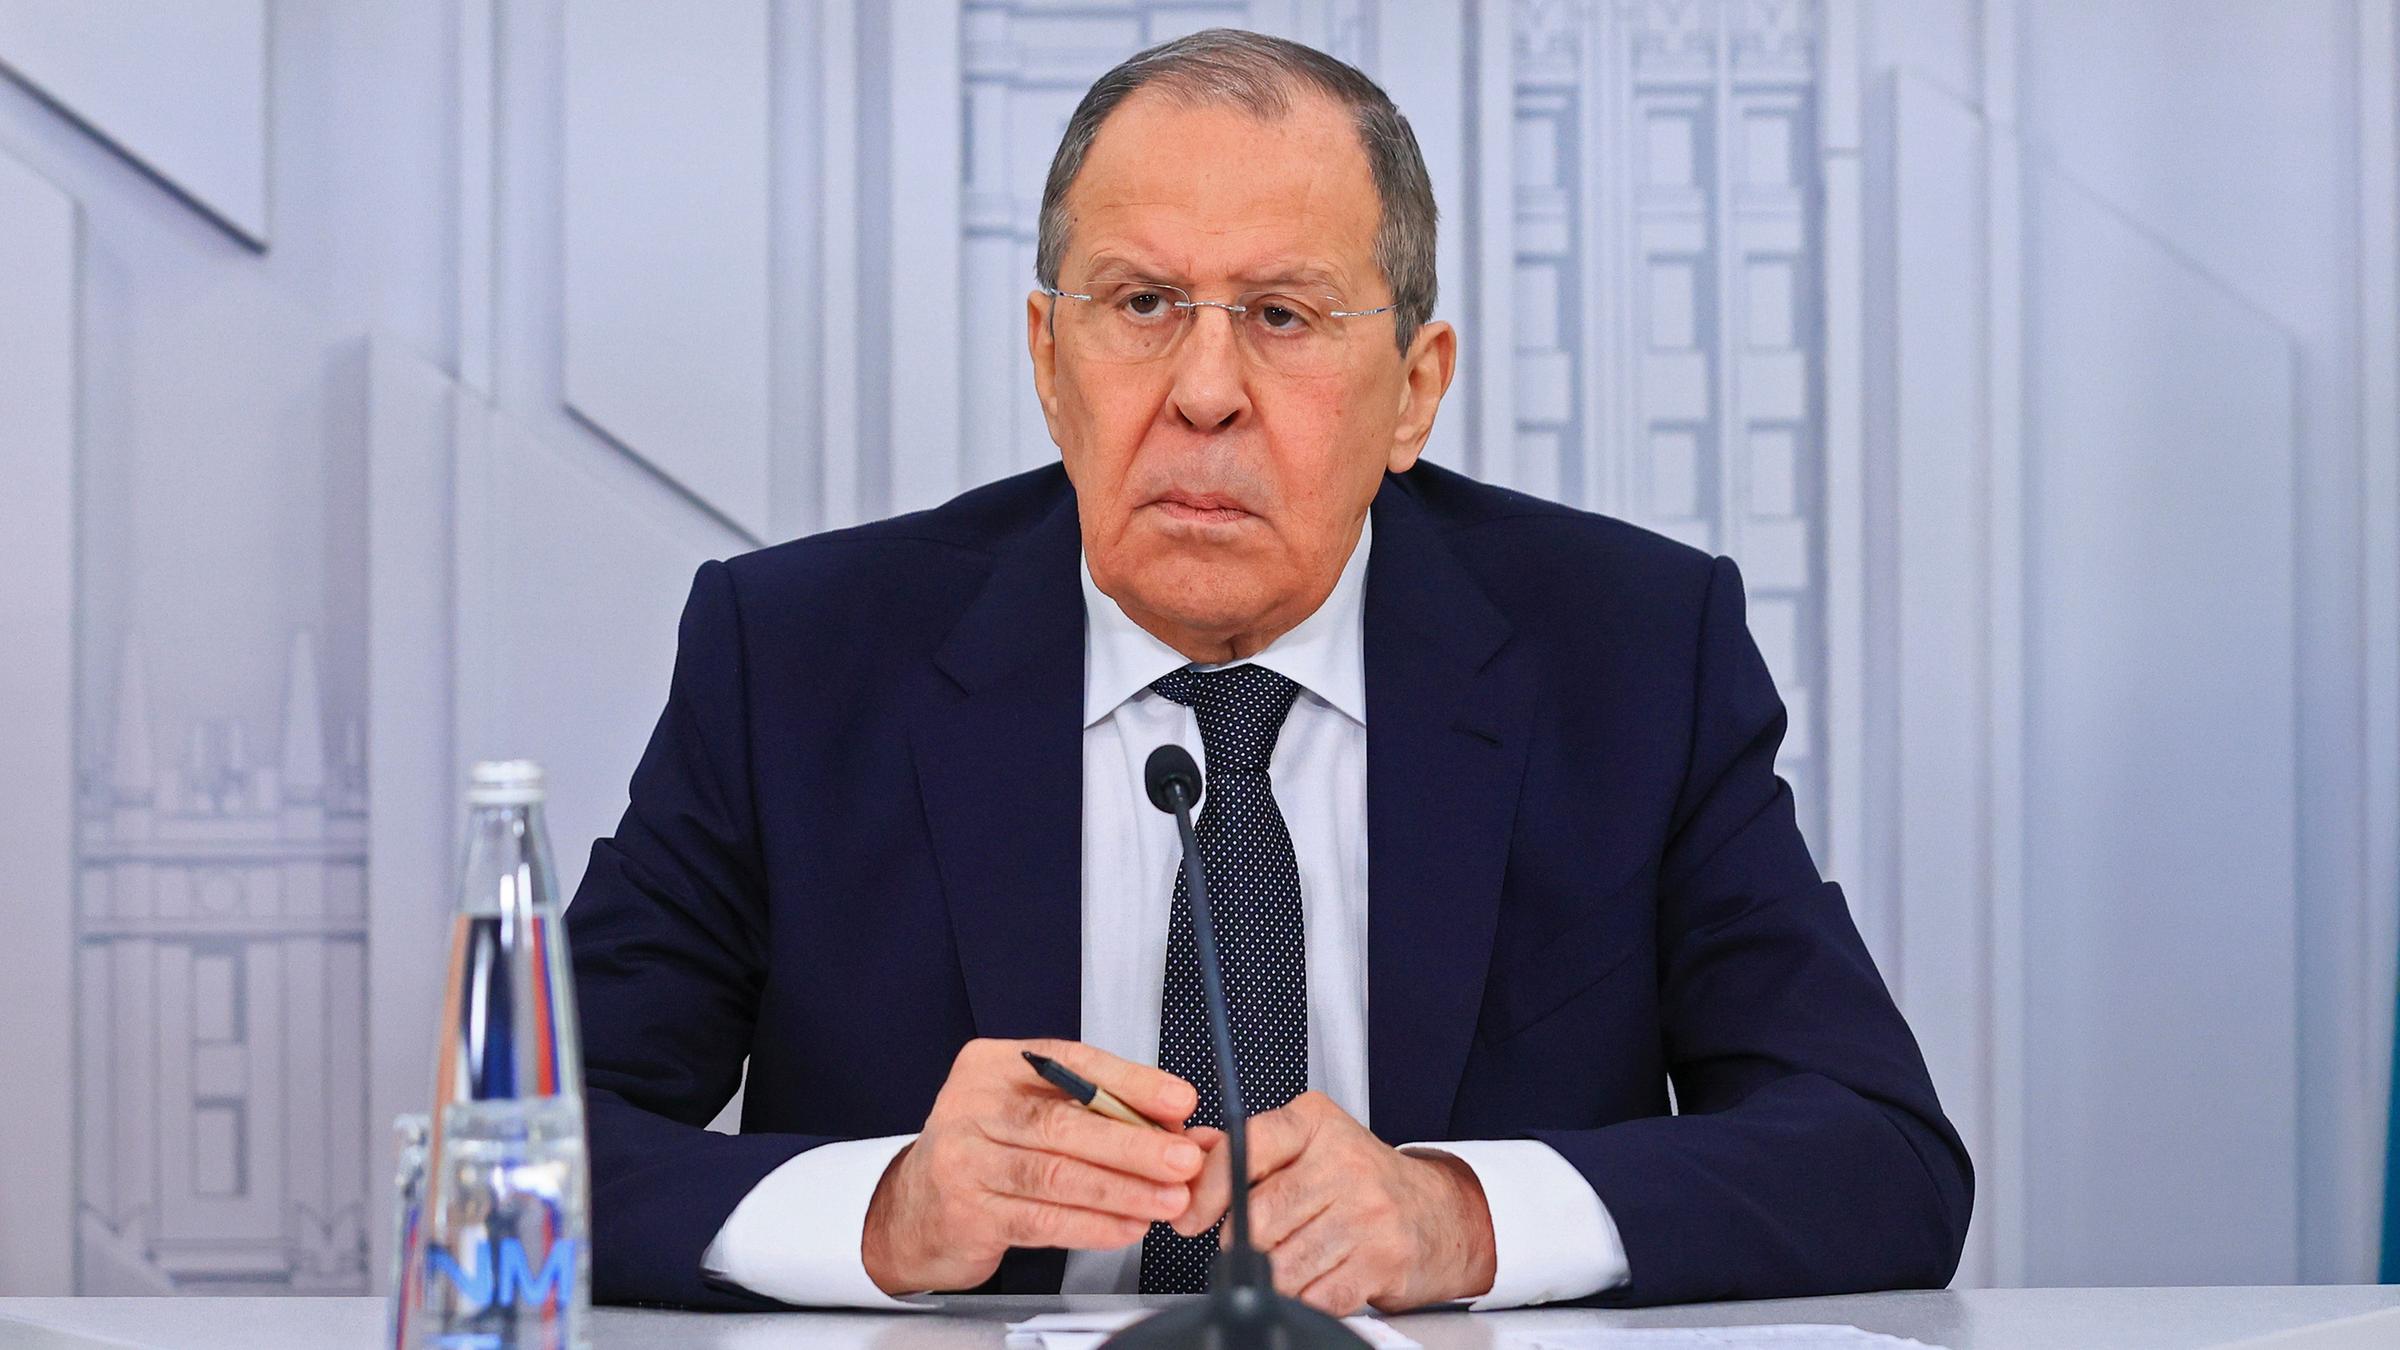 Russian Foreign Minister Sergey Lavrov photographed in Moscow (Russia) on June 6, 2022.